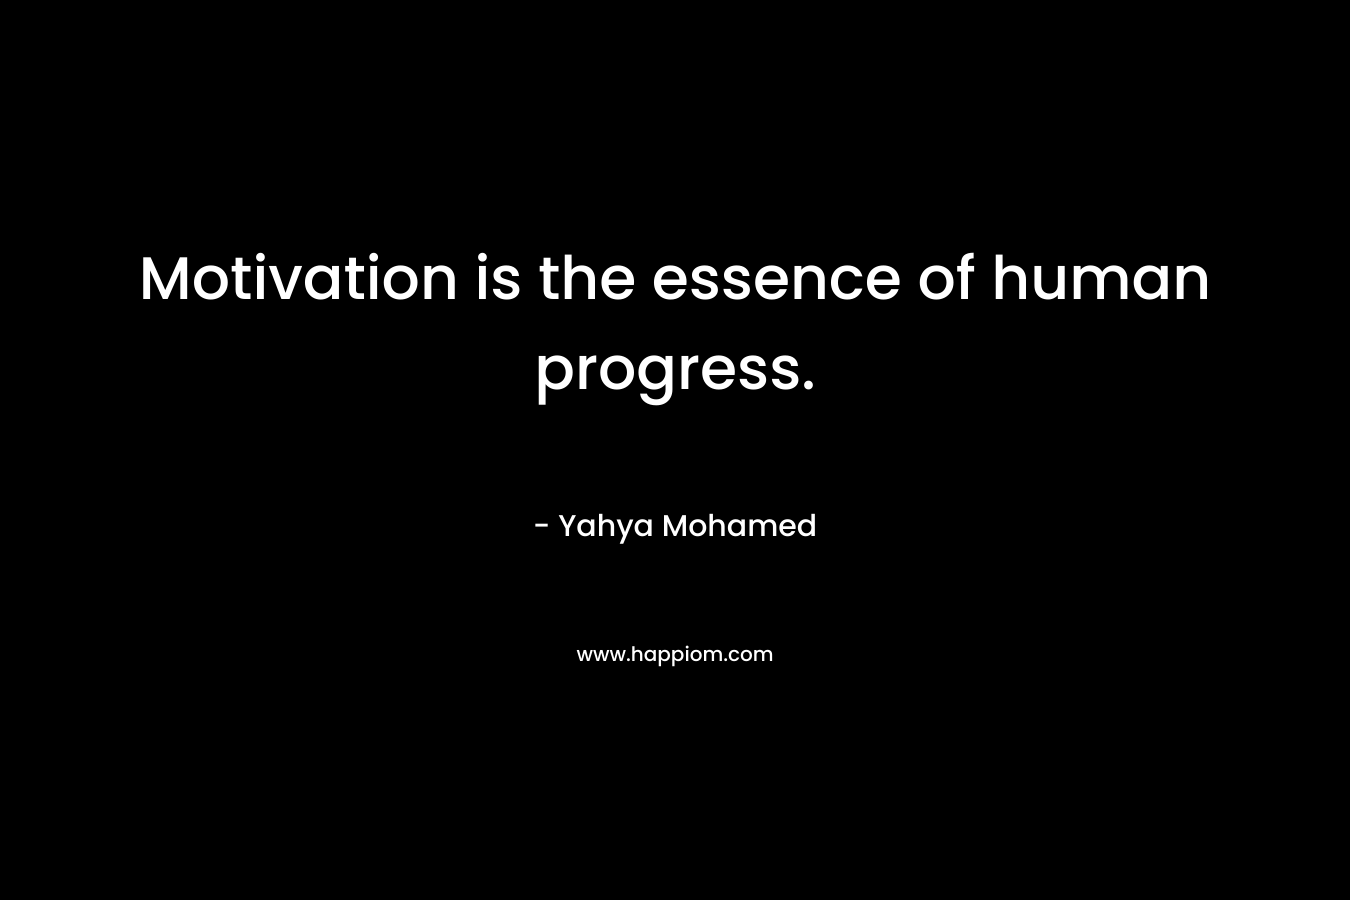 Motivation is the essence of human progress. – Yahya Mohamed